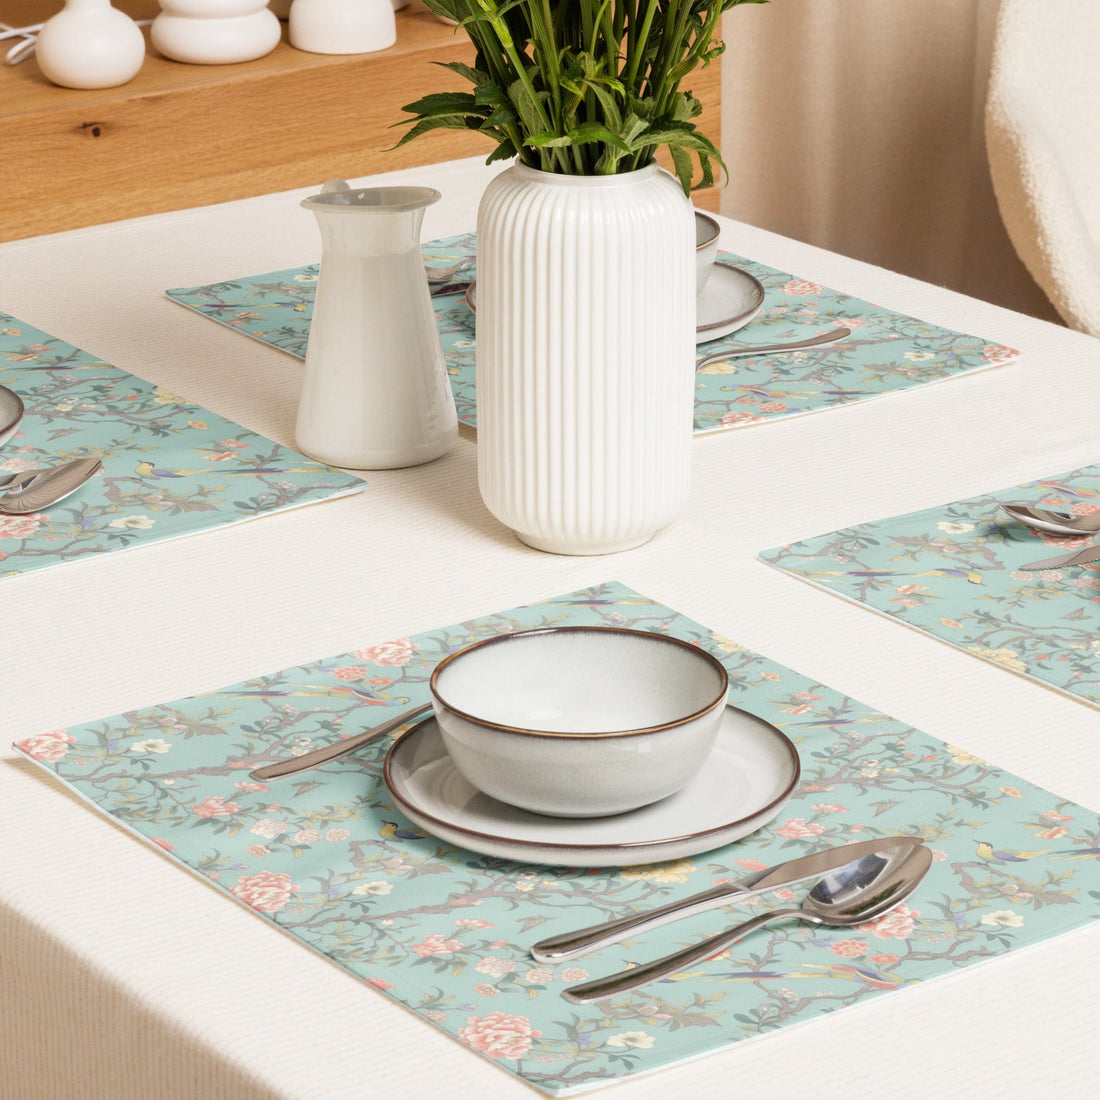 Kate McEnroe New York Pastel Chinoiserie Placemats, Set of 4, Elegant Floral and Bird Table MatsPlacemats9231200_17484